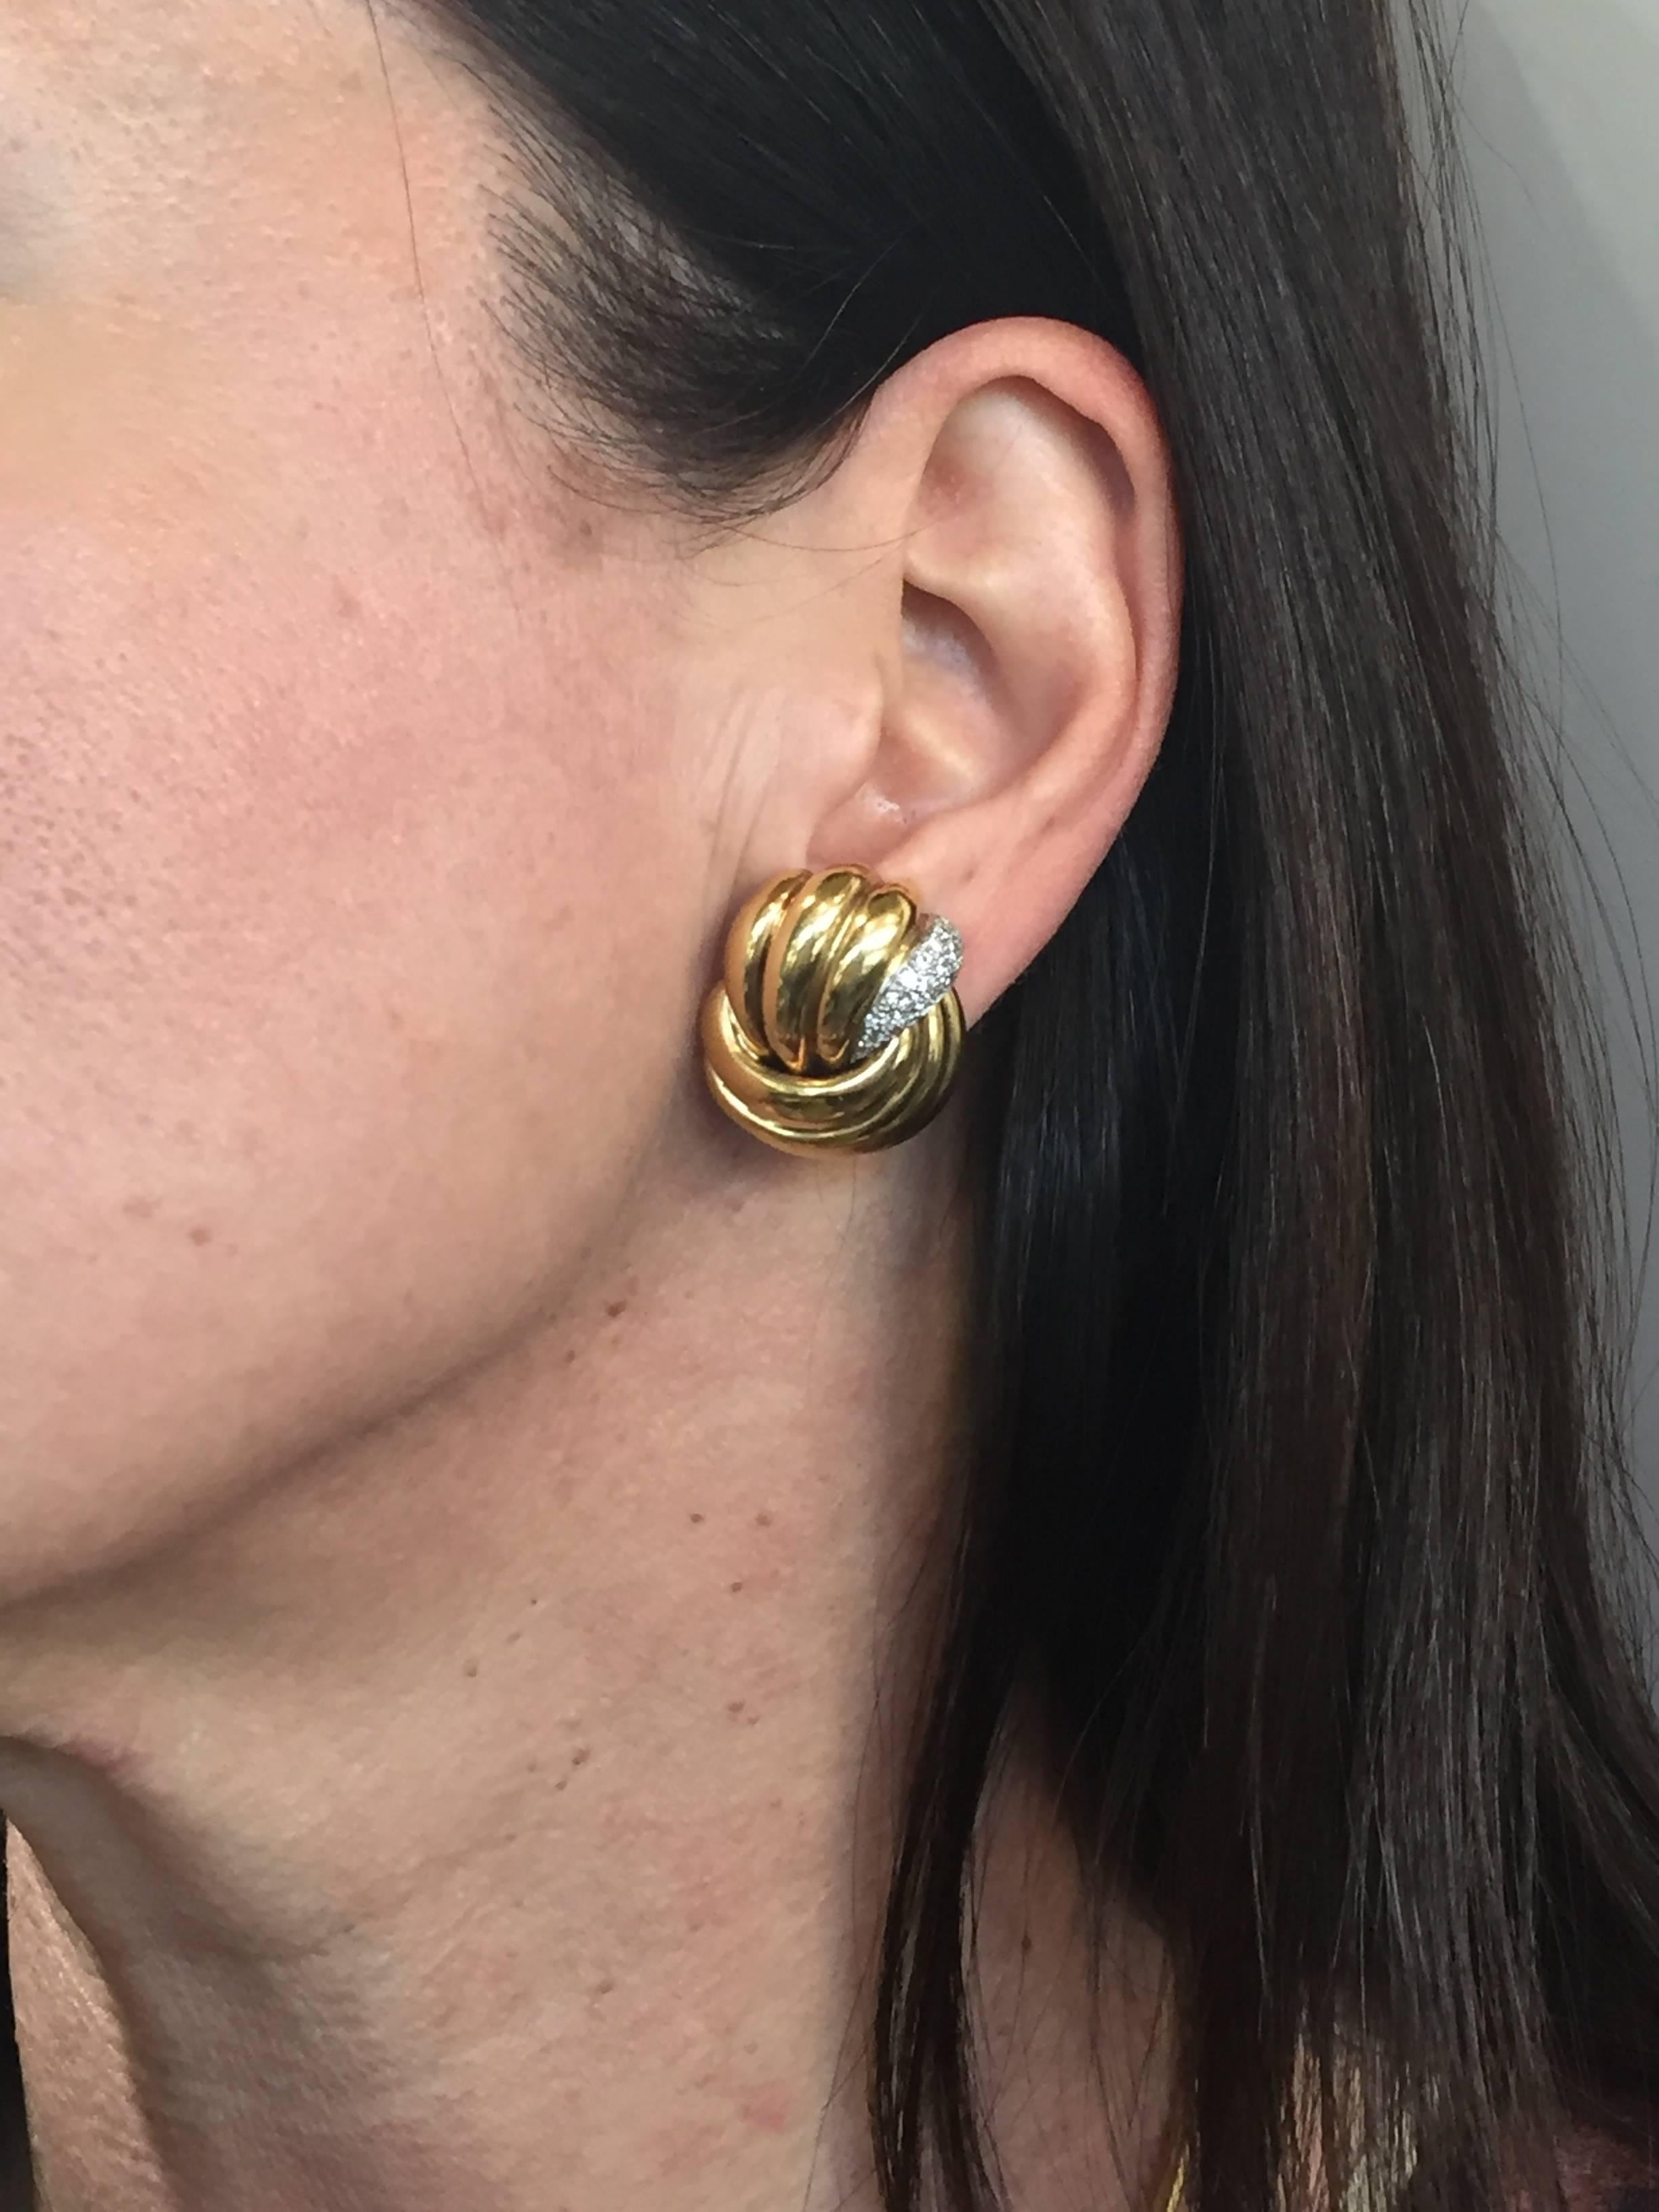 Elegant and classy earrings created by Verdura in the 1980s. Chic, stylish and wearable, the earrings are a great addition to your jewelry collection.
The earrings are made of 18 karat (tested) yellow gold and set with thirty four round brilliant